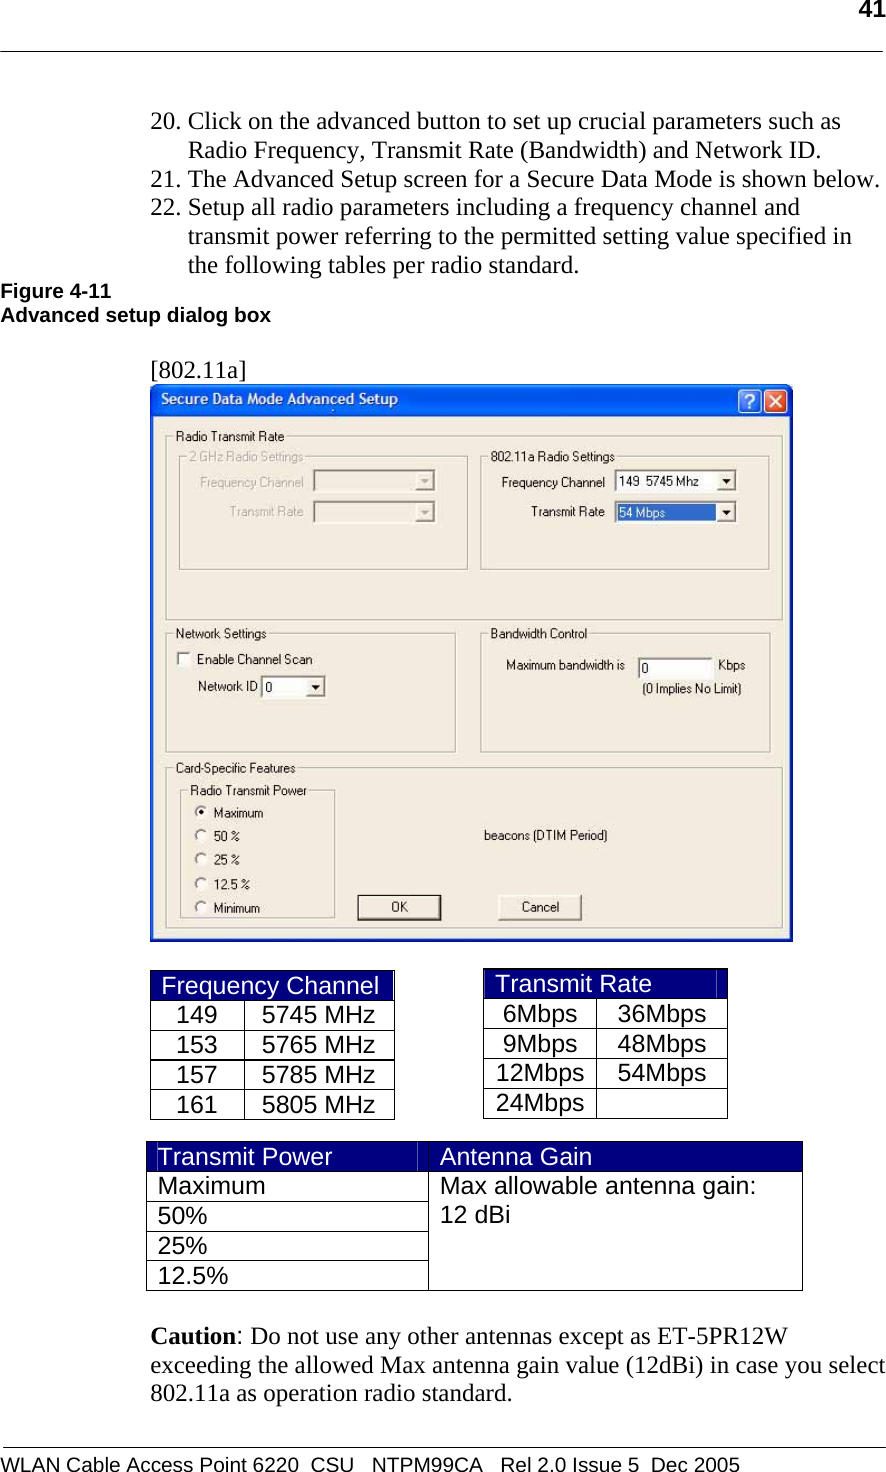   41  WLAN Cable Access Point 6220  CSU   NTPM99CA   Rel 2.0 Issue 5  Dec 2005 20. Click on the advanced button to set up crucial parameters such as Radio Frequency, Transmit Rate (Bandwidth) and Network ID. 21. The Advanced Setup screen for a Secure Data Mode is shown below.  22. Setup all radio parameters including a frequency channel and transmit power referring to the permitted setting value specified in the following tables per radio standard.  Figure 4-11 Advanced setup dialog box  [802.11a]   Frequency Channel149 5745 MHz153 5765 MHz157 5785 MHz161 5805 MHz       Caution: Do not use any other antennas except as ET-5PR12W exceeding the allowed Max antenna gain value (12dBi) in case you select 802.11a as operation radio standard.   Transmit Rate 6Mbps 36Mbps 9Mbps 48Mbps 12Mbps 54Mbps 24Mbps  Transmit Power  Antenna Gain Maximum 50% 25% 12.5% Max allowable antenna gain:  12 dBi    